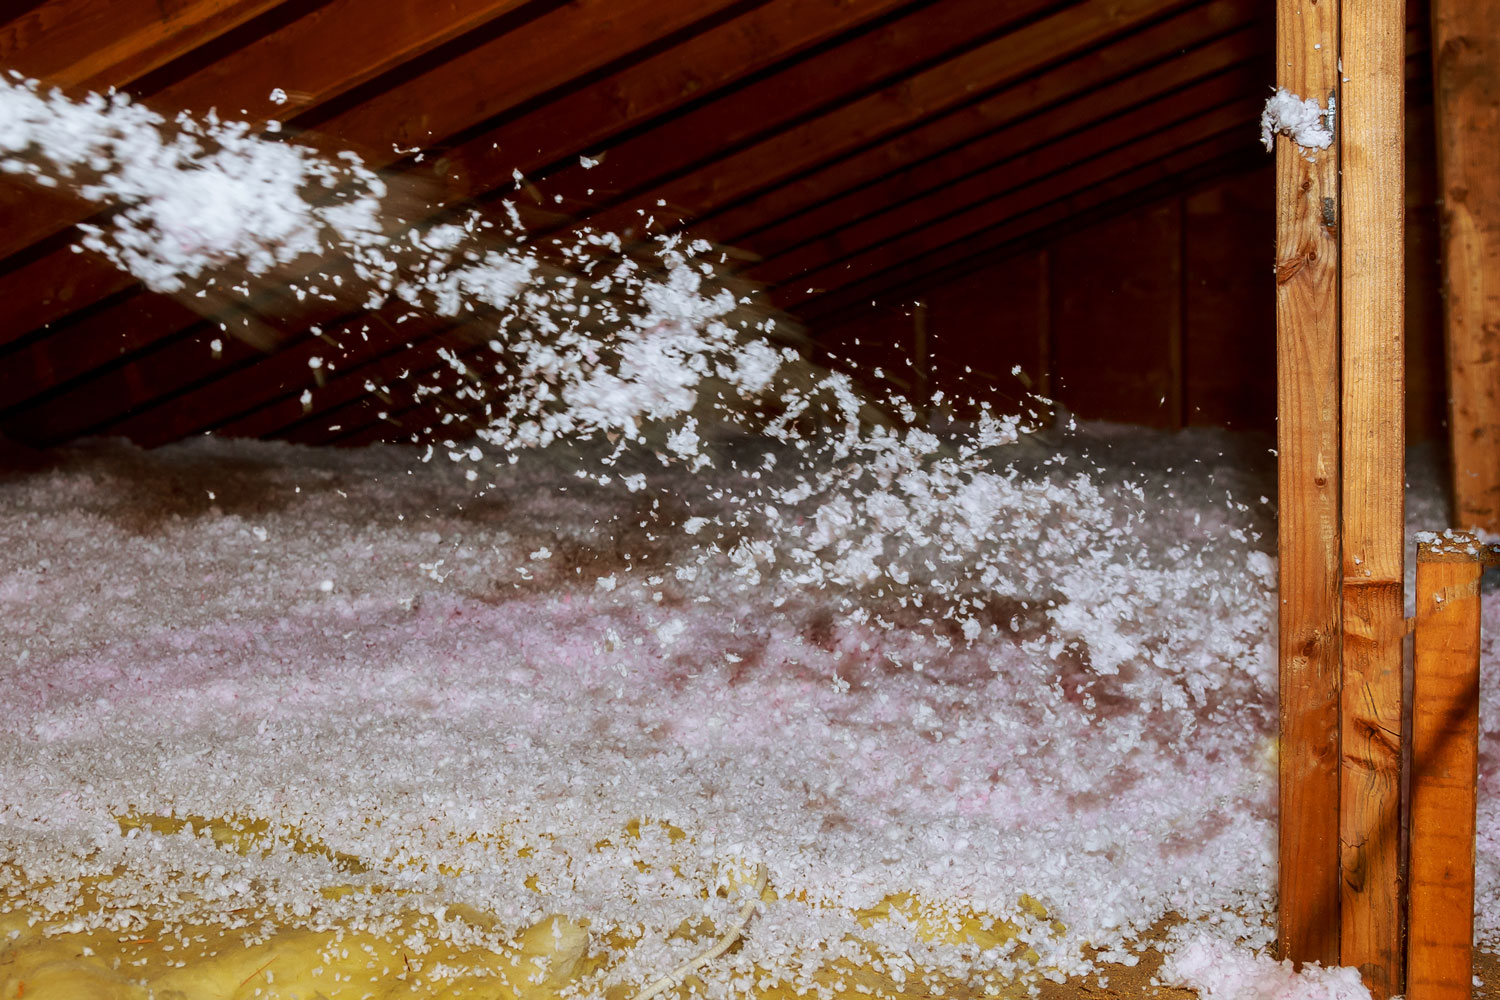 Blown-in insulation on the attic